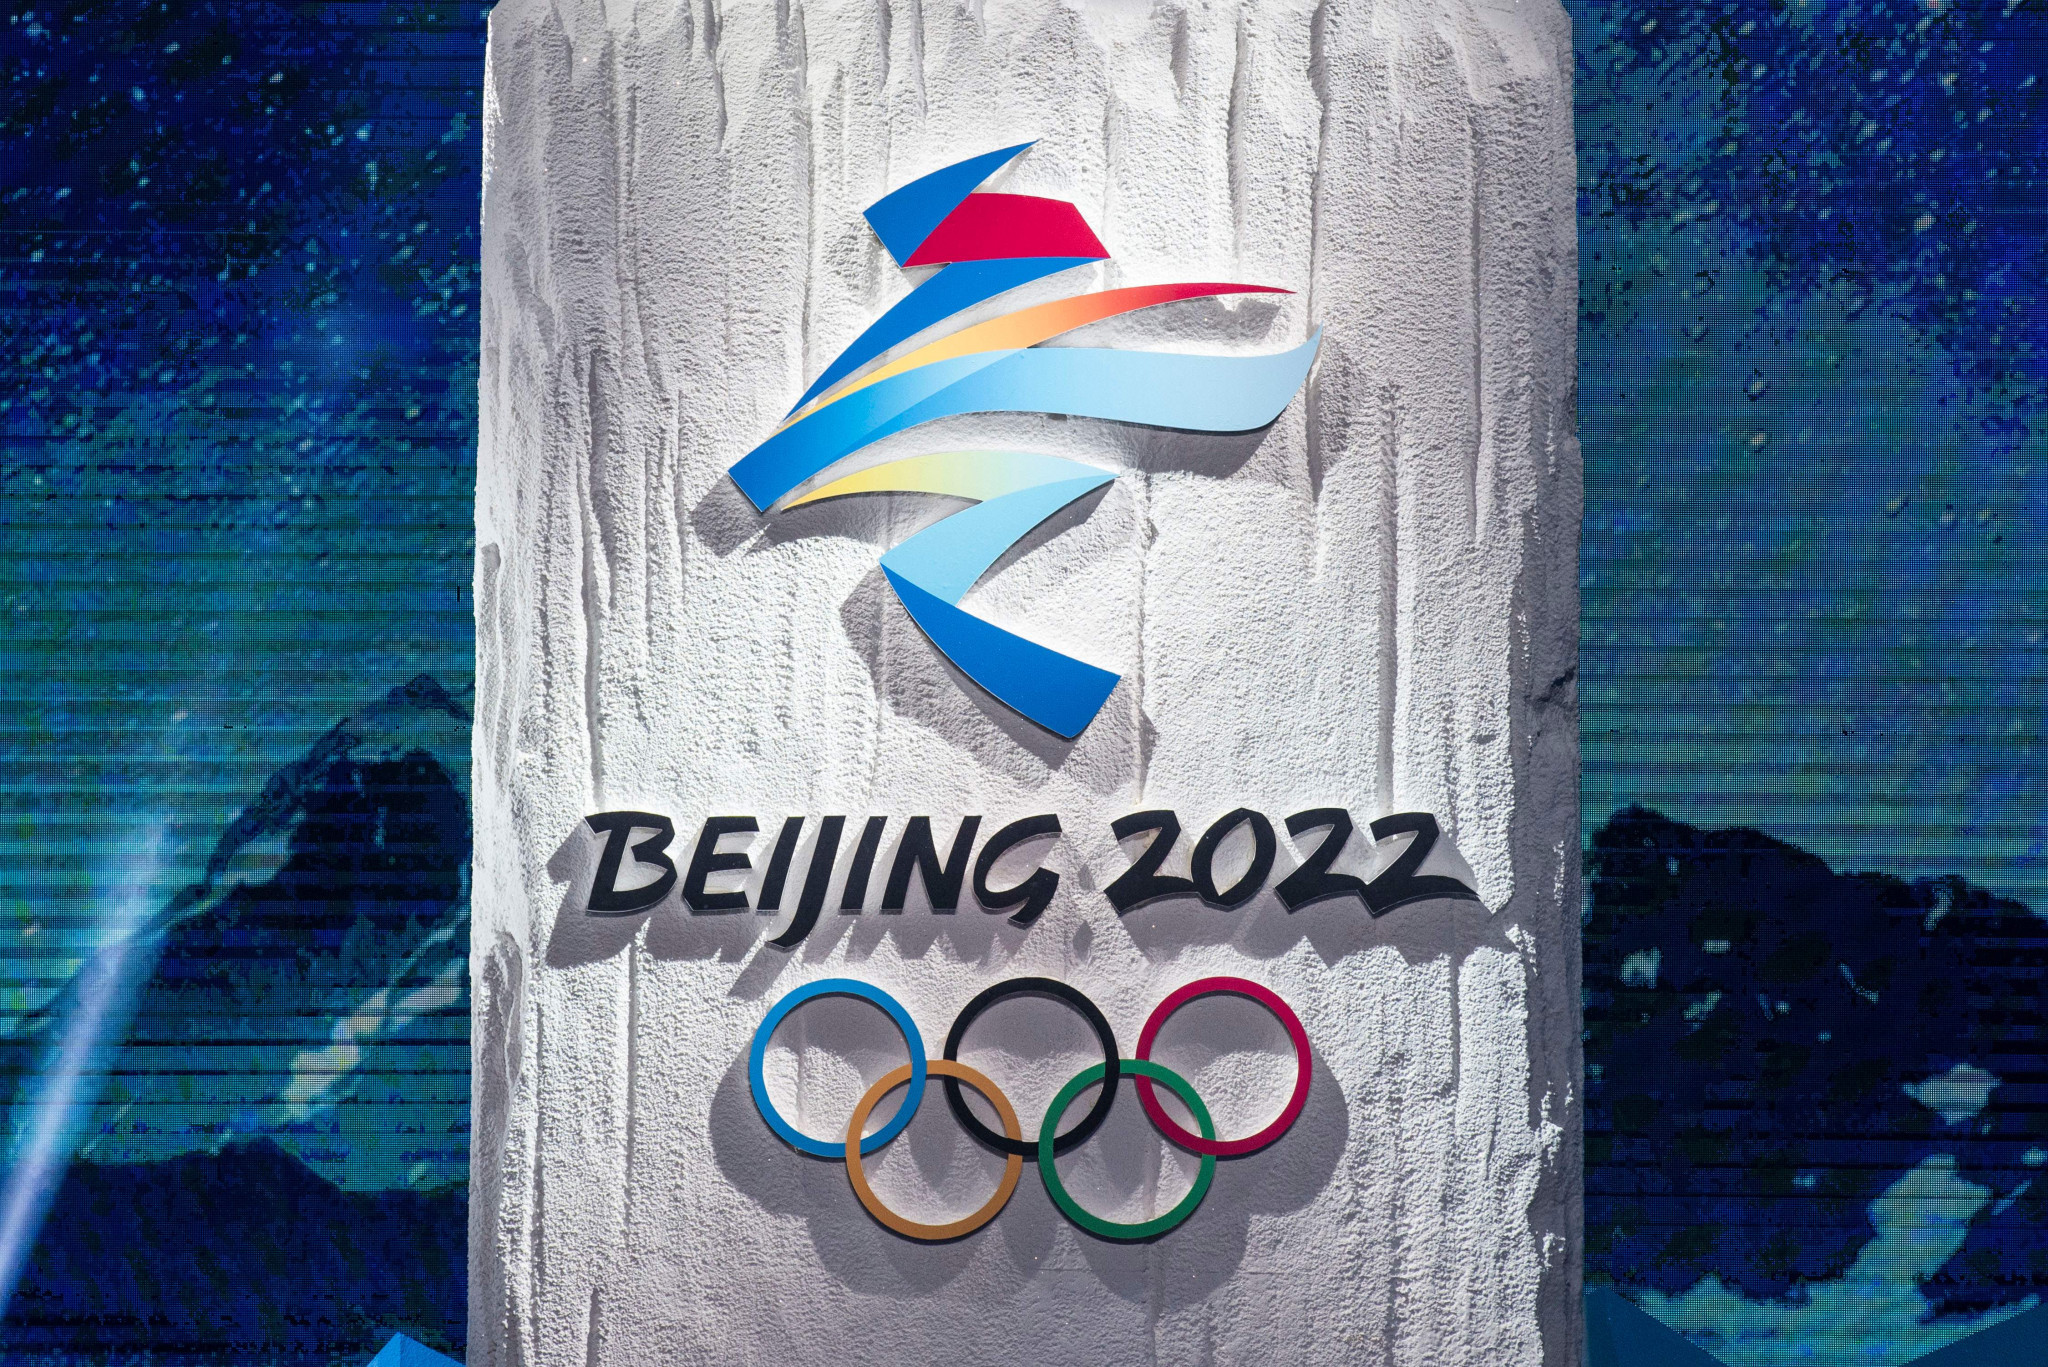 Beijing 2022 publishes Pre-Games Sustainability Report